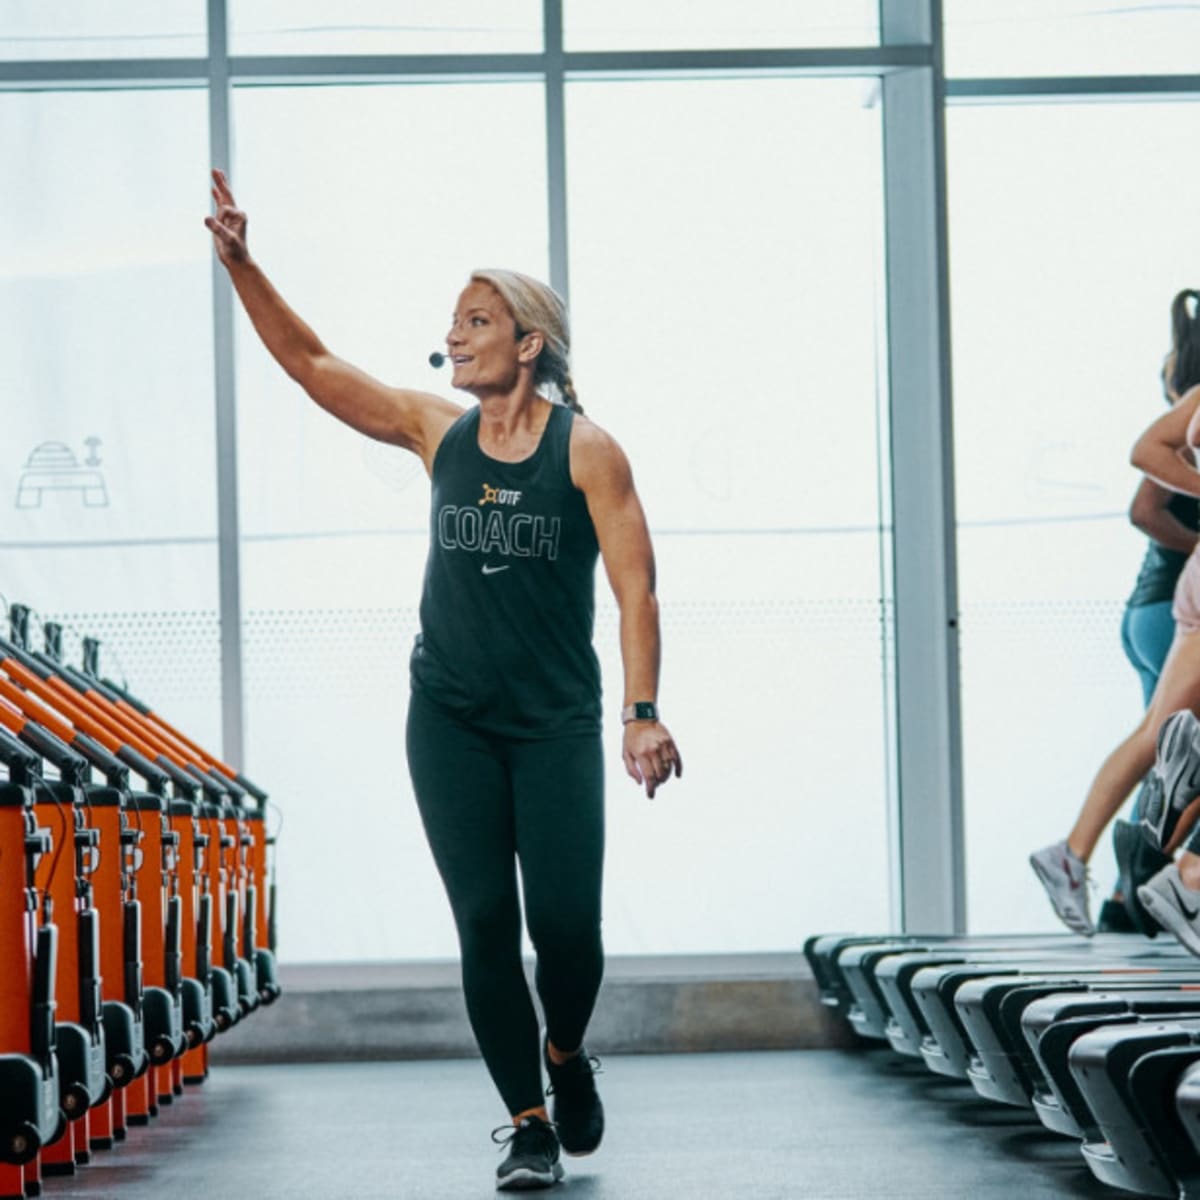 Orangetheory Fitness Review: What to Expect From Your First Class - Fitness  Test Drive